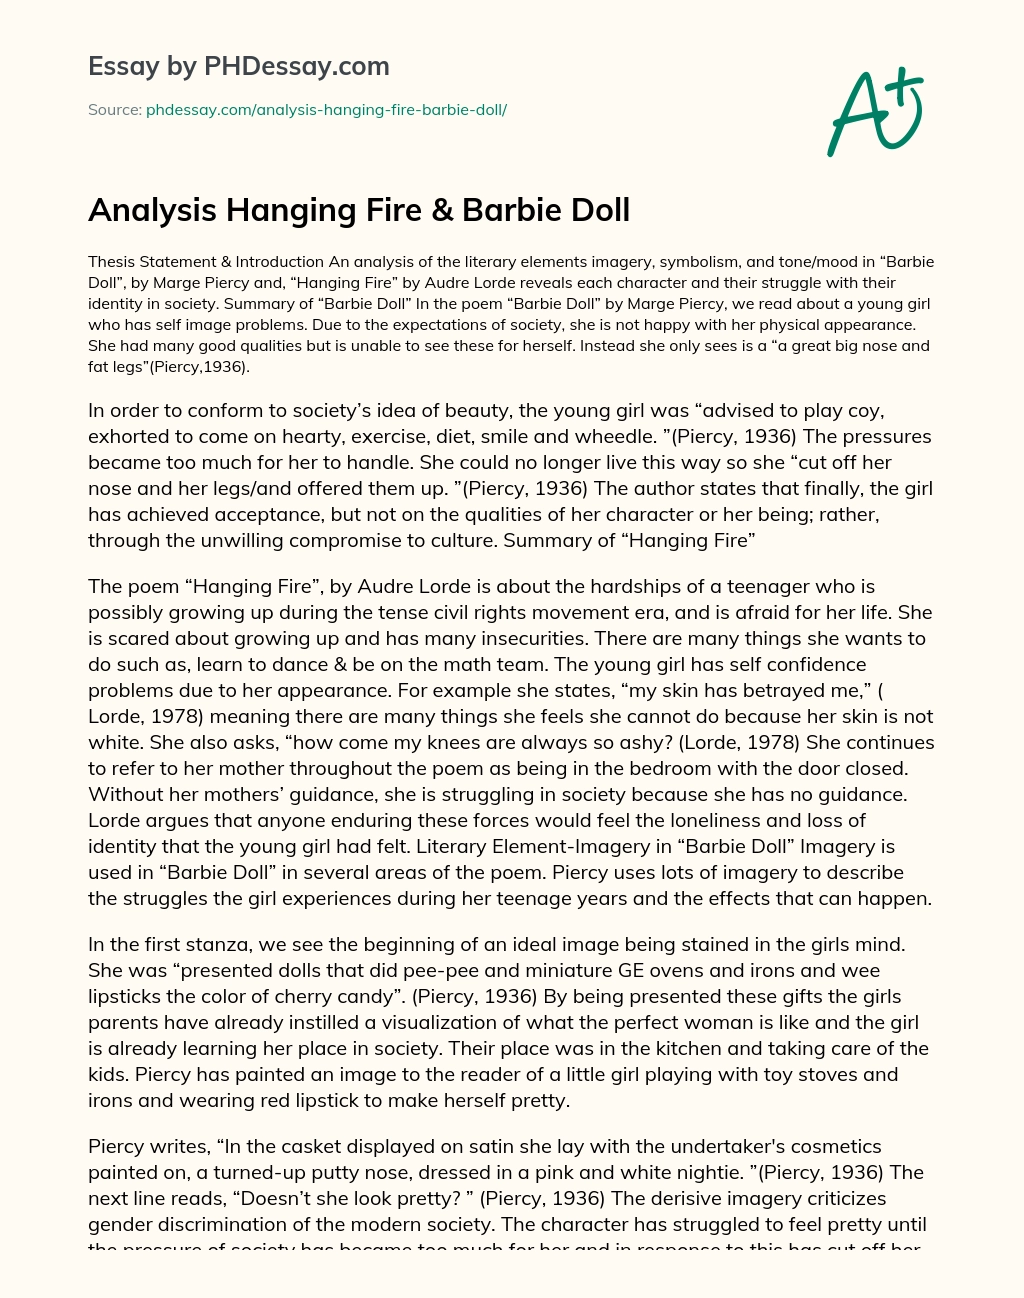 Analysis Hanging Fire & Barbie Doll essay